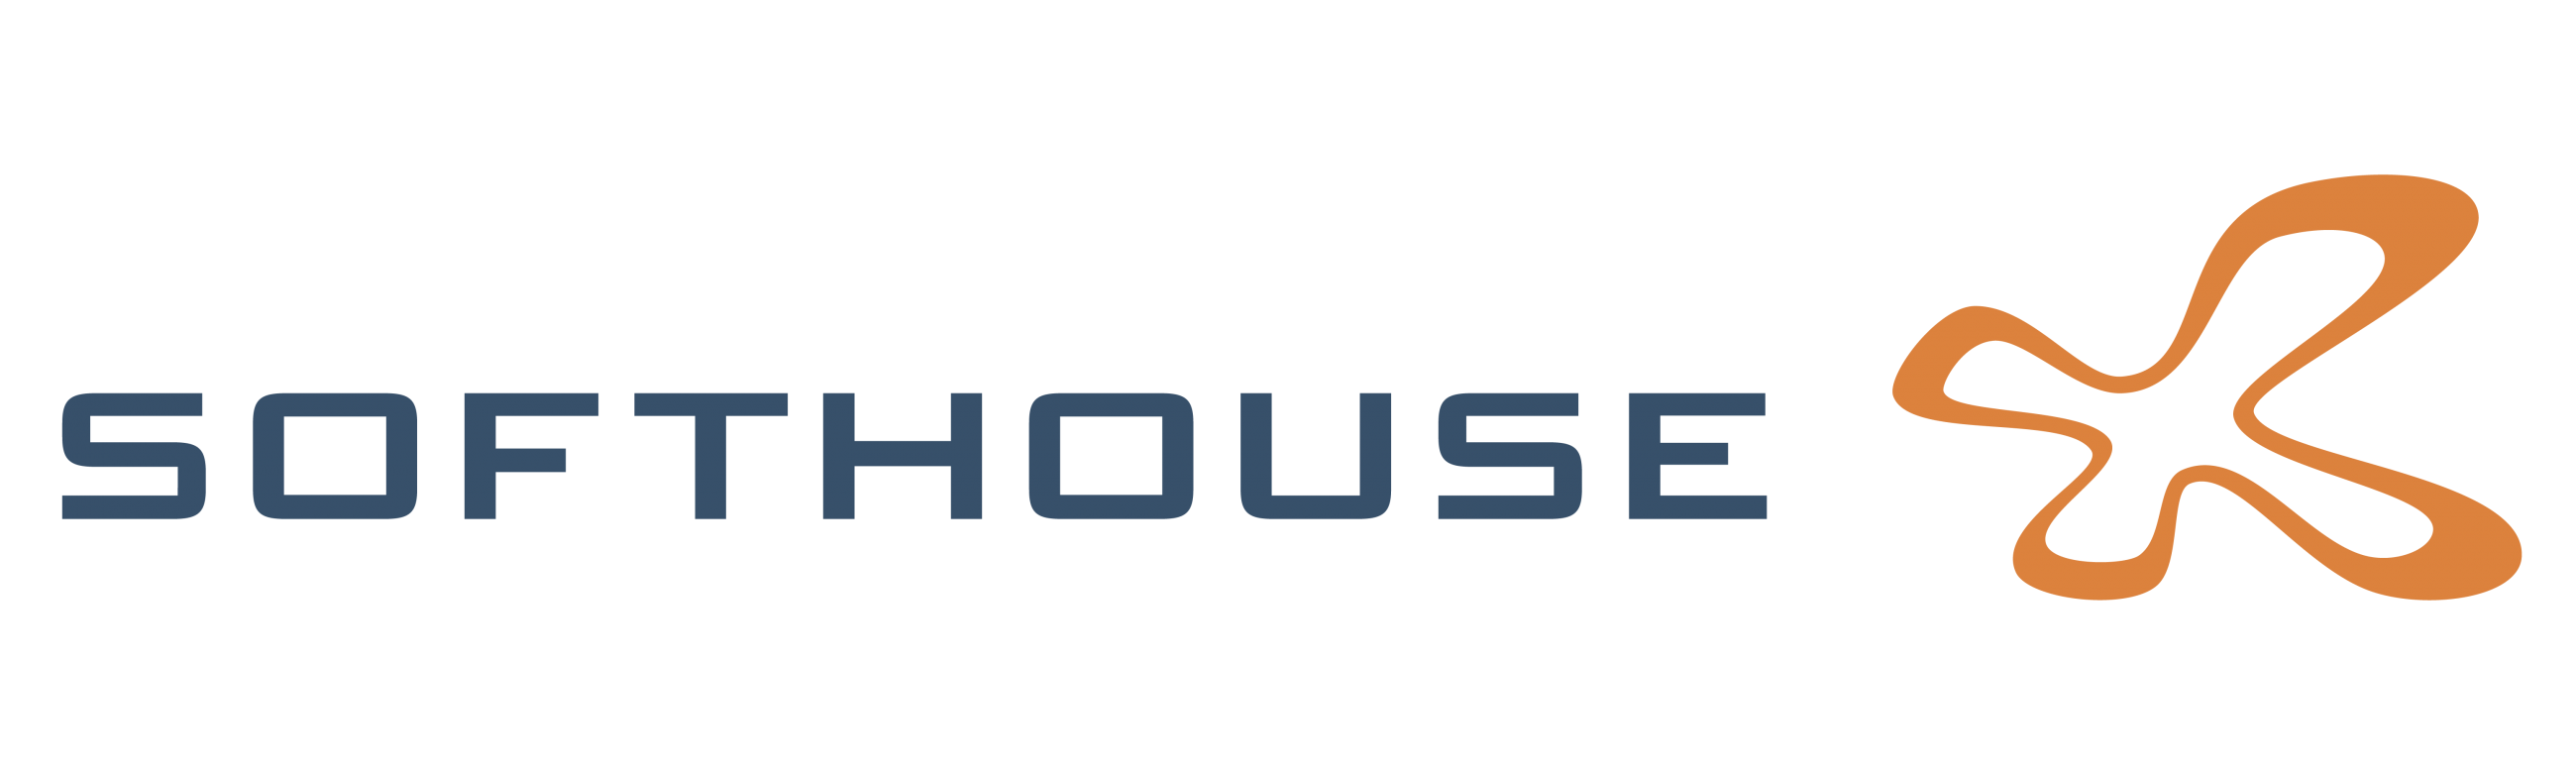 Softhouse_Ref21_logo.png